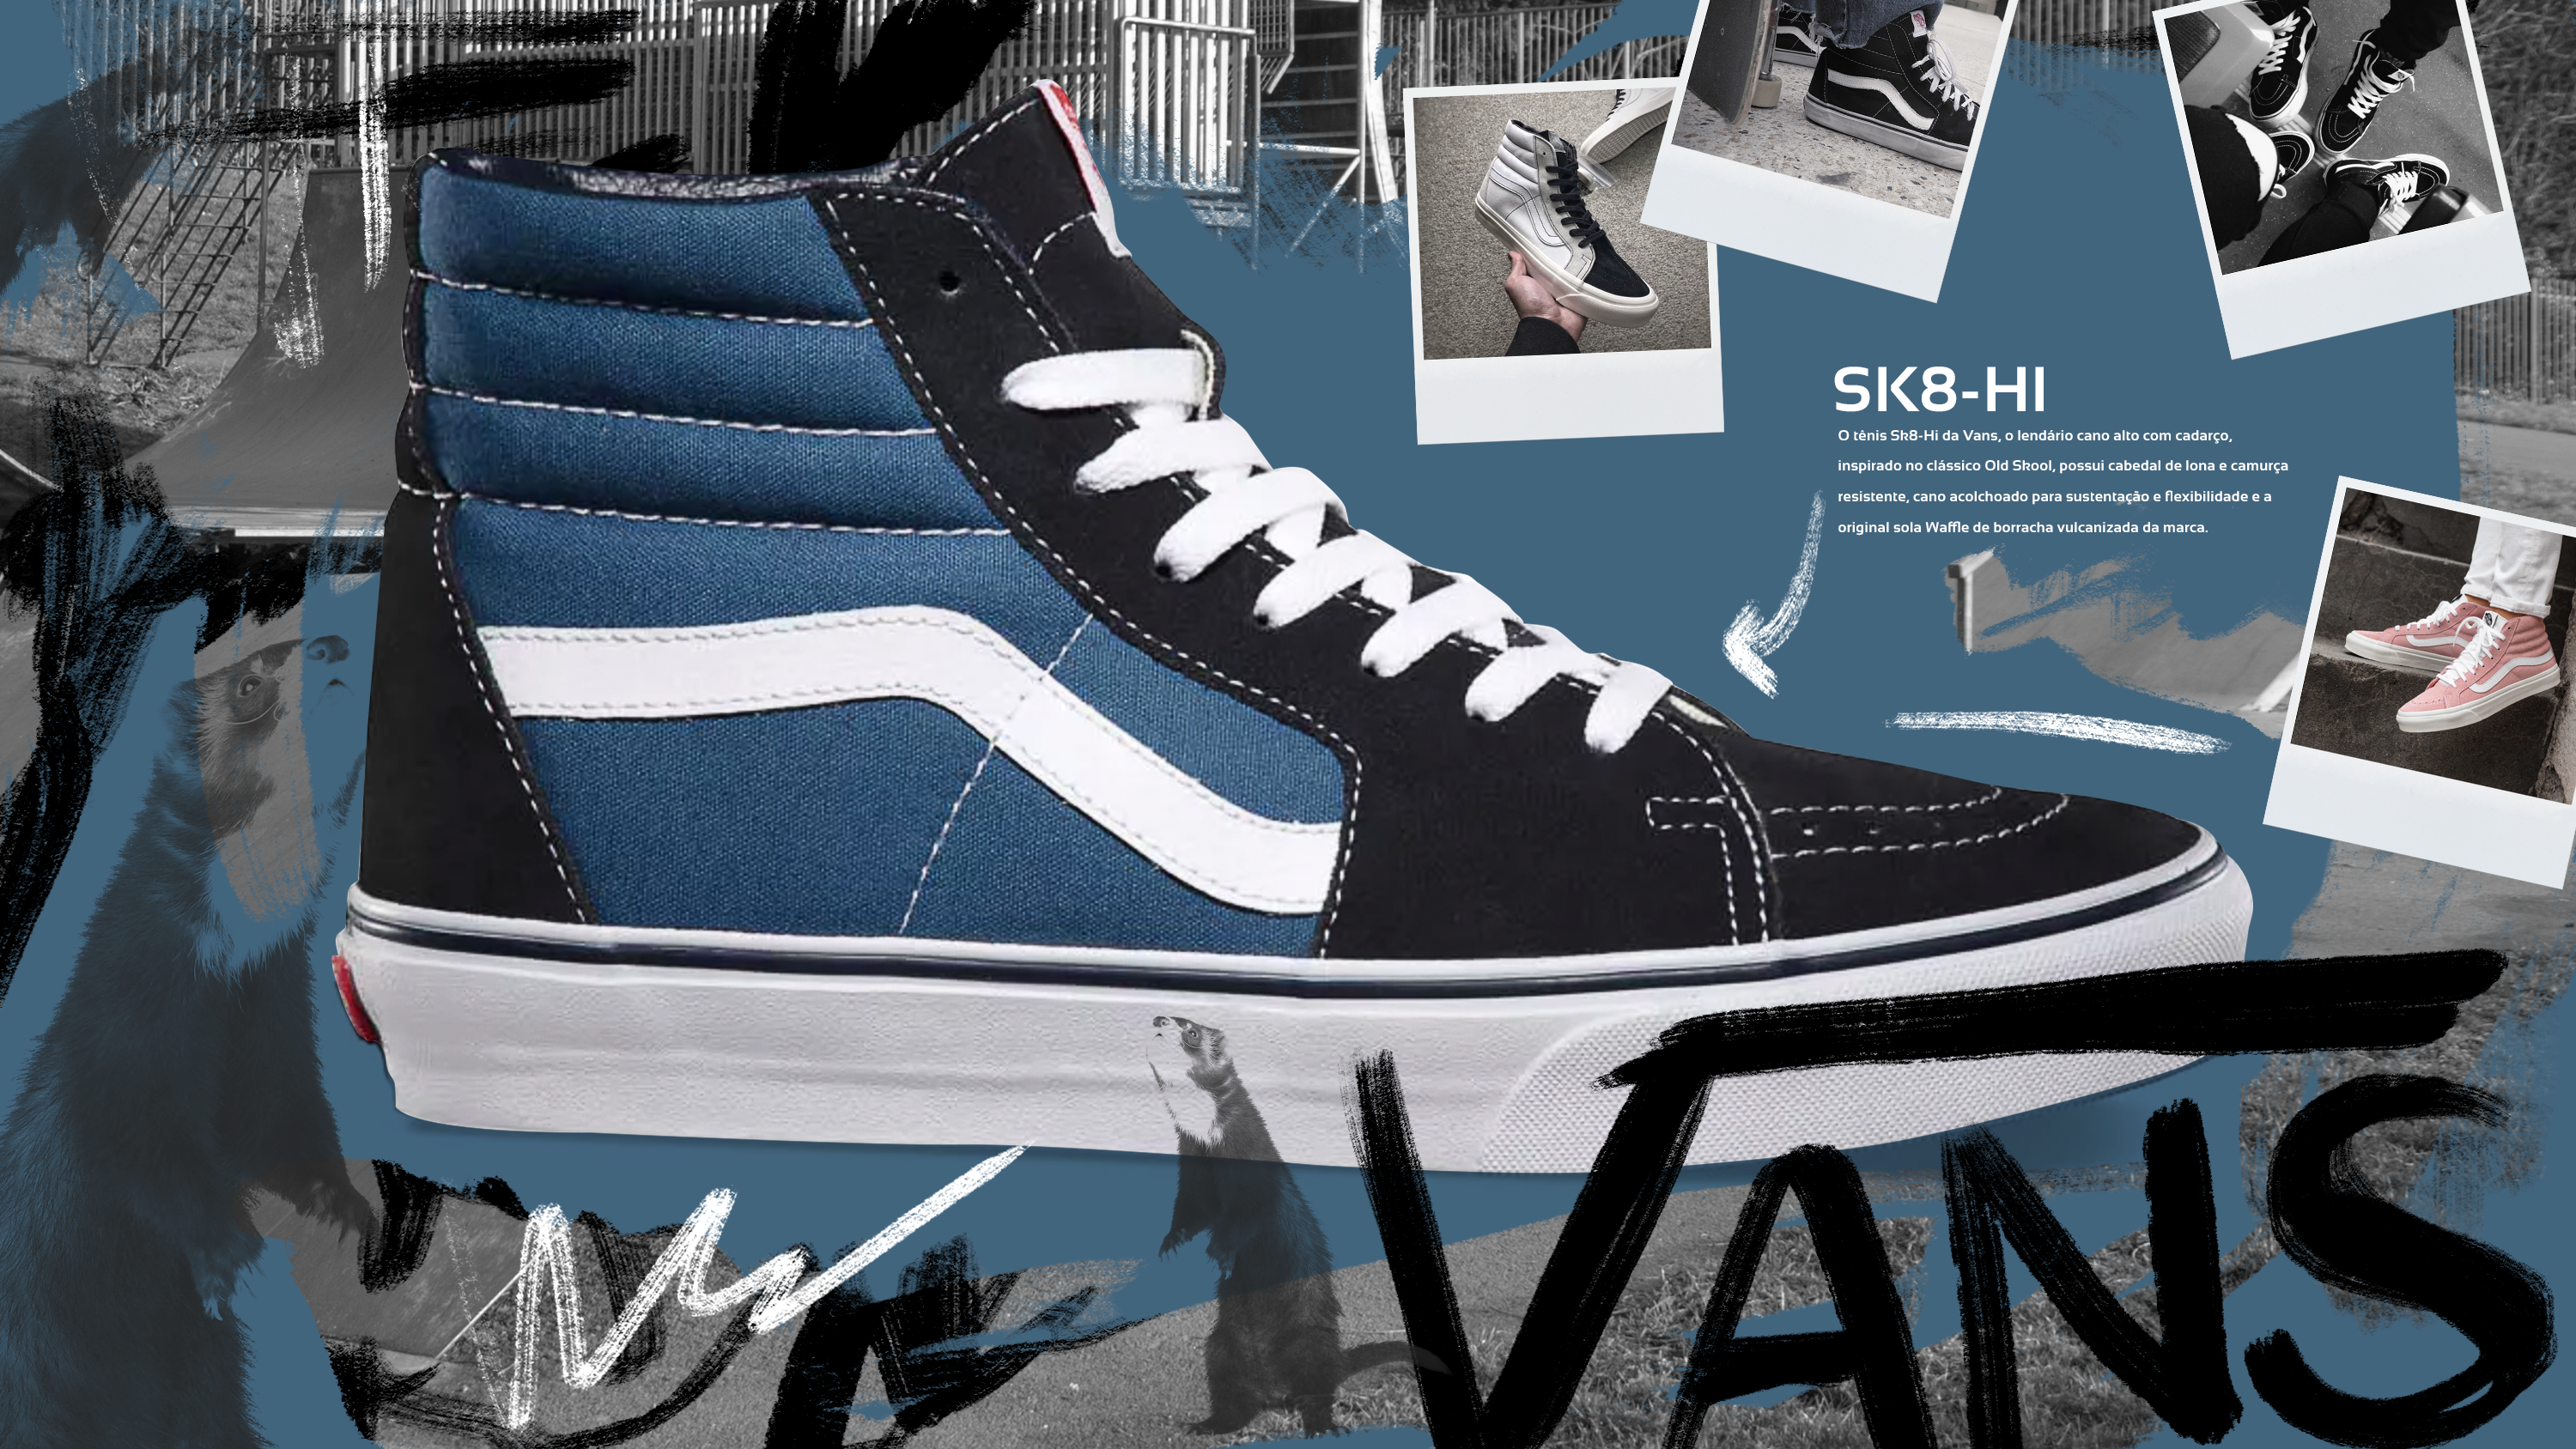 vans off the wall official site